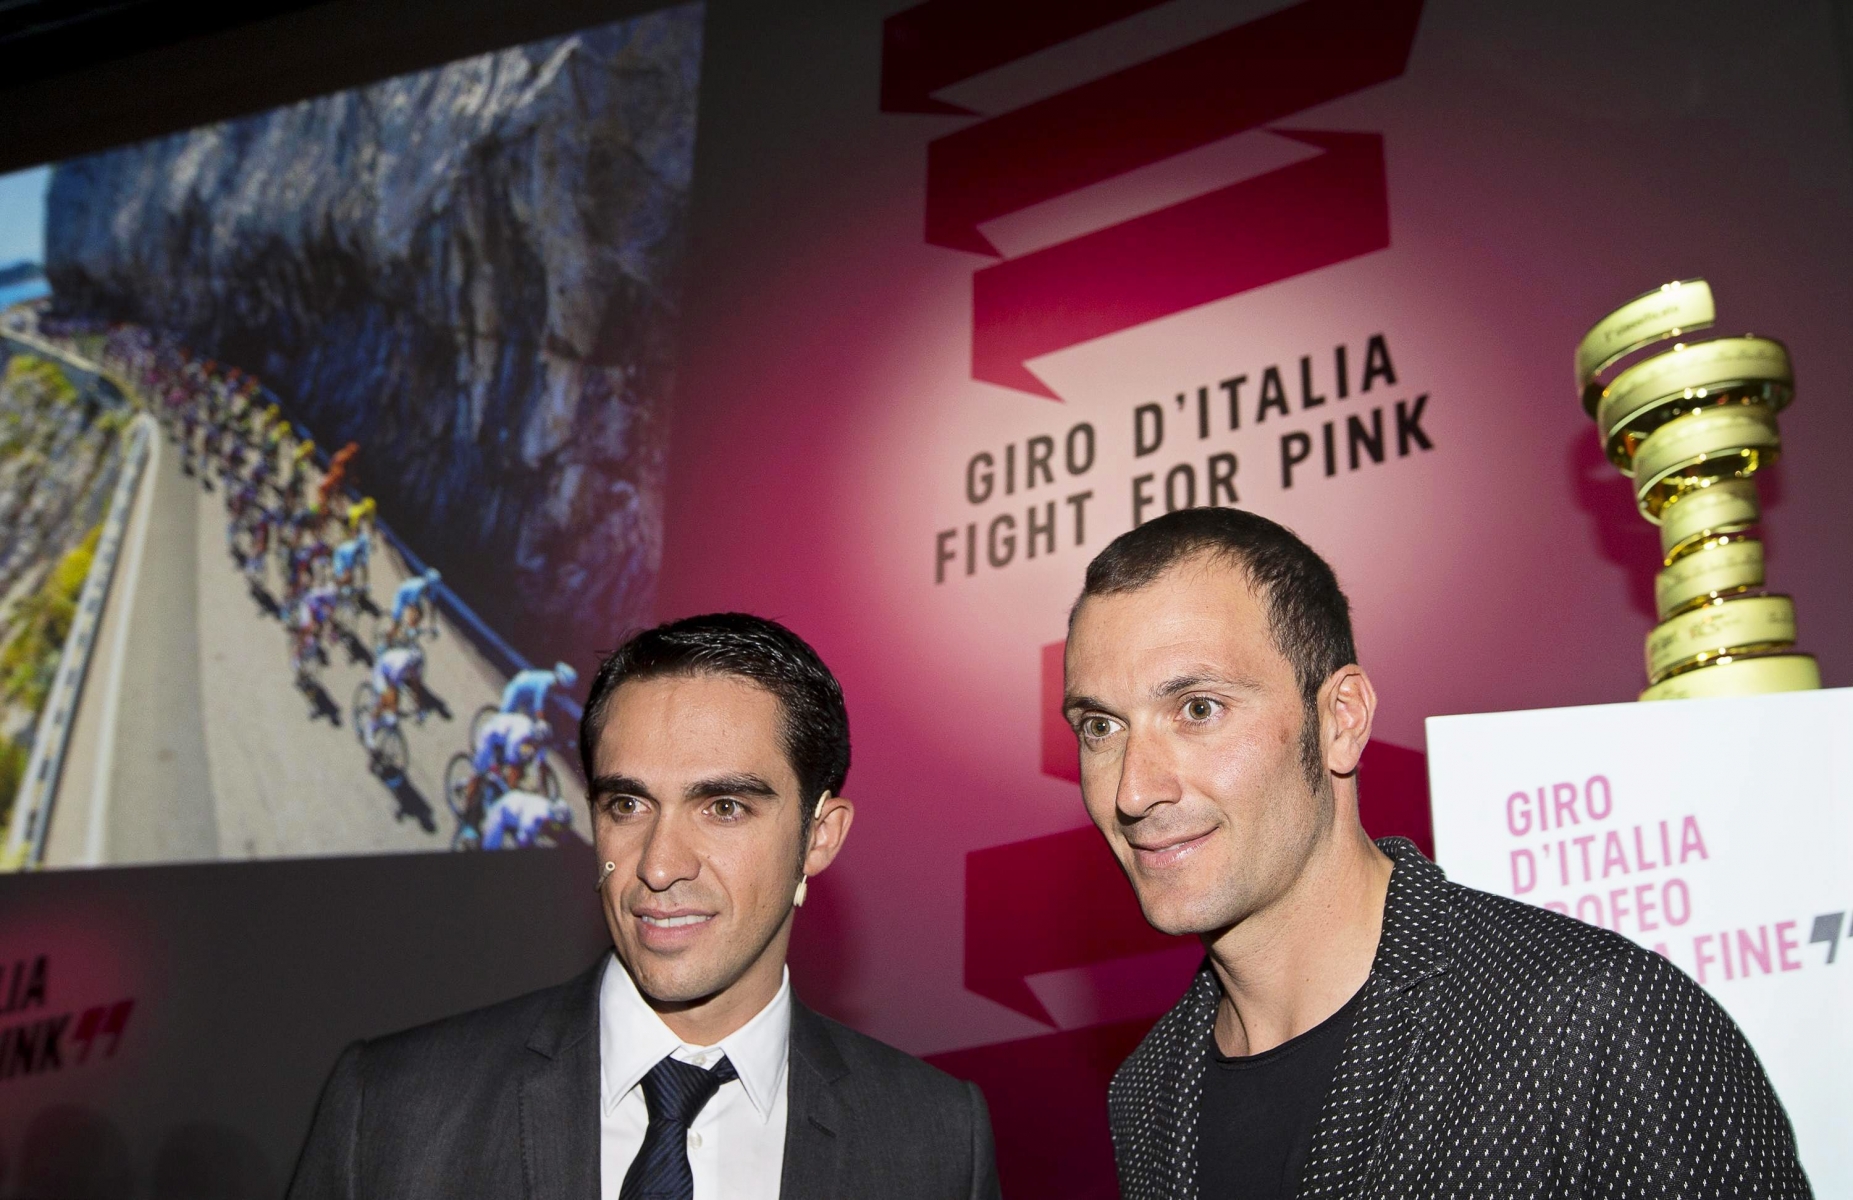 epa04964749 Spanish rider Alberto Contador (L) of the Tinkoff-Saxo team and his Italian teammate Ivan Basso (R) attend the presentation of the Giro d'Italia 2016 cycling tour in Milan, Italy, 05 October 2015. The 99th edition of the Giro d'Italia will take place from 06 May until 29 May 2016.  EPA/CLAUDIO PERI ITALY CYCLING GIRO D'ITALIA